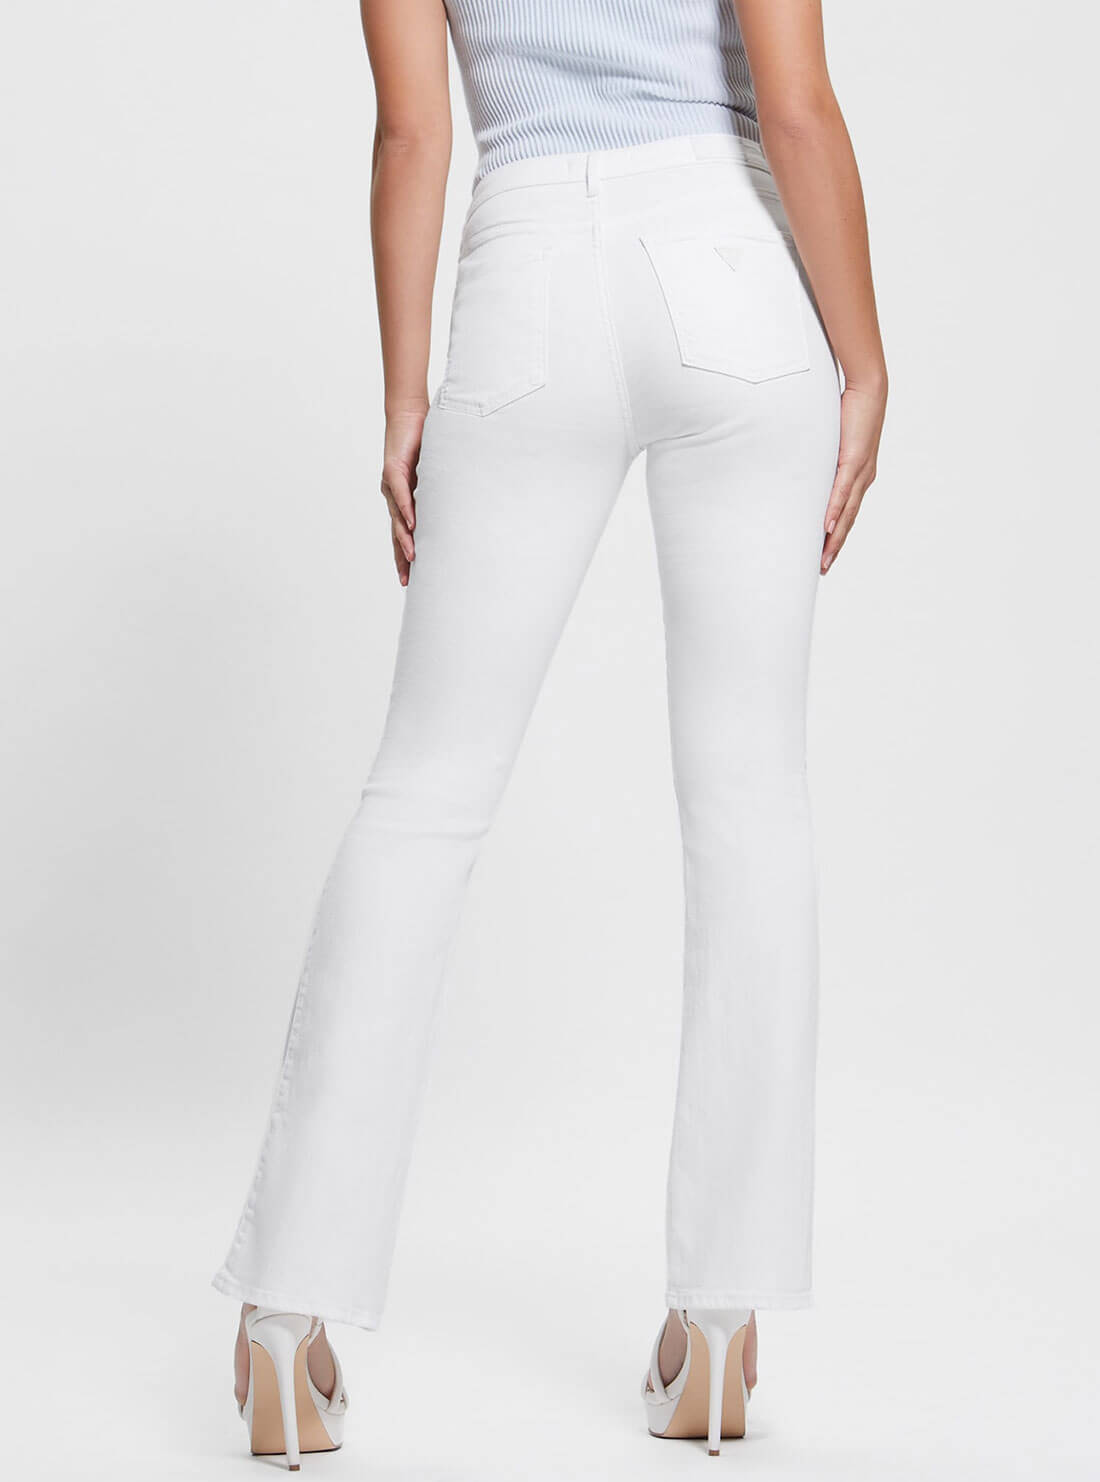  High-Rise Sexy Flare Leg Denim Jeans In Clean White Wash | GUESS Women's Denim | back view